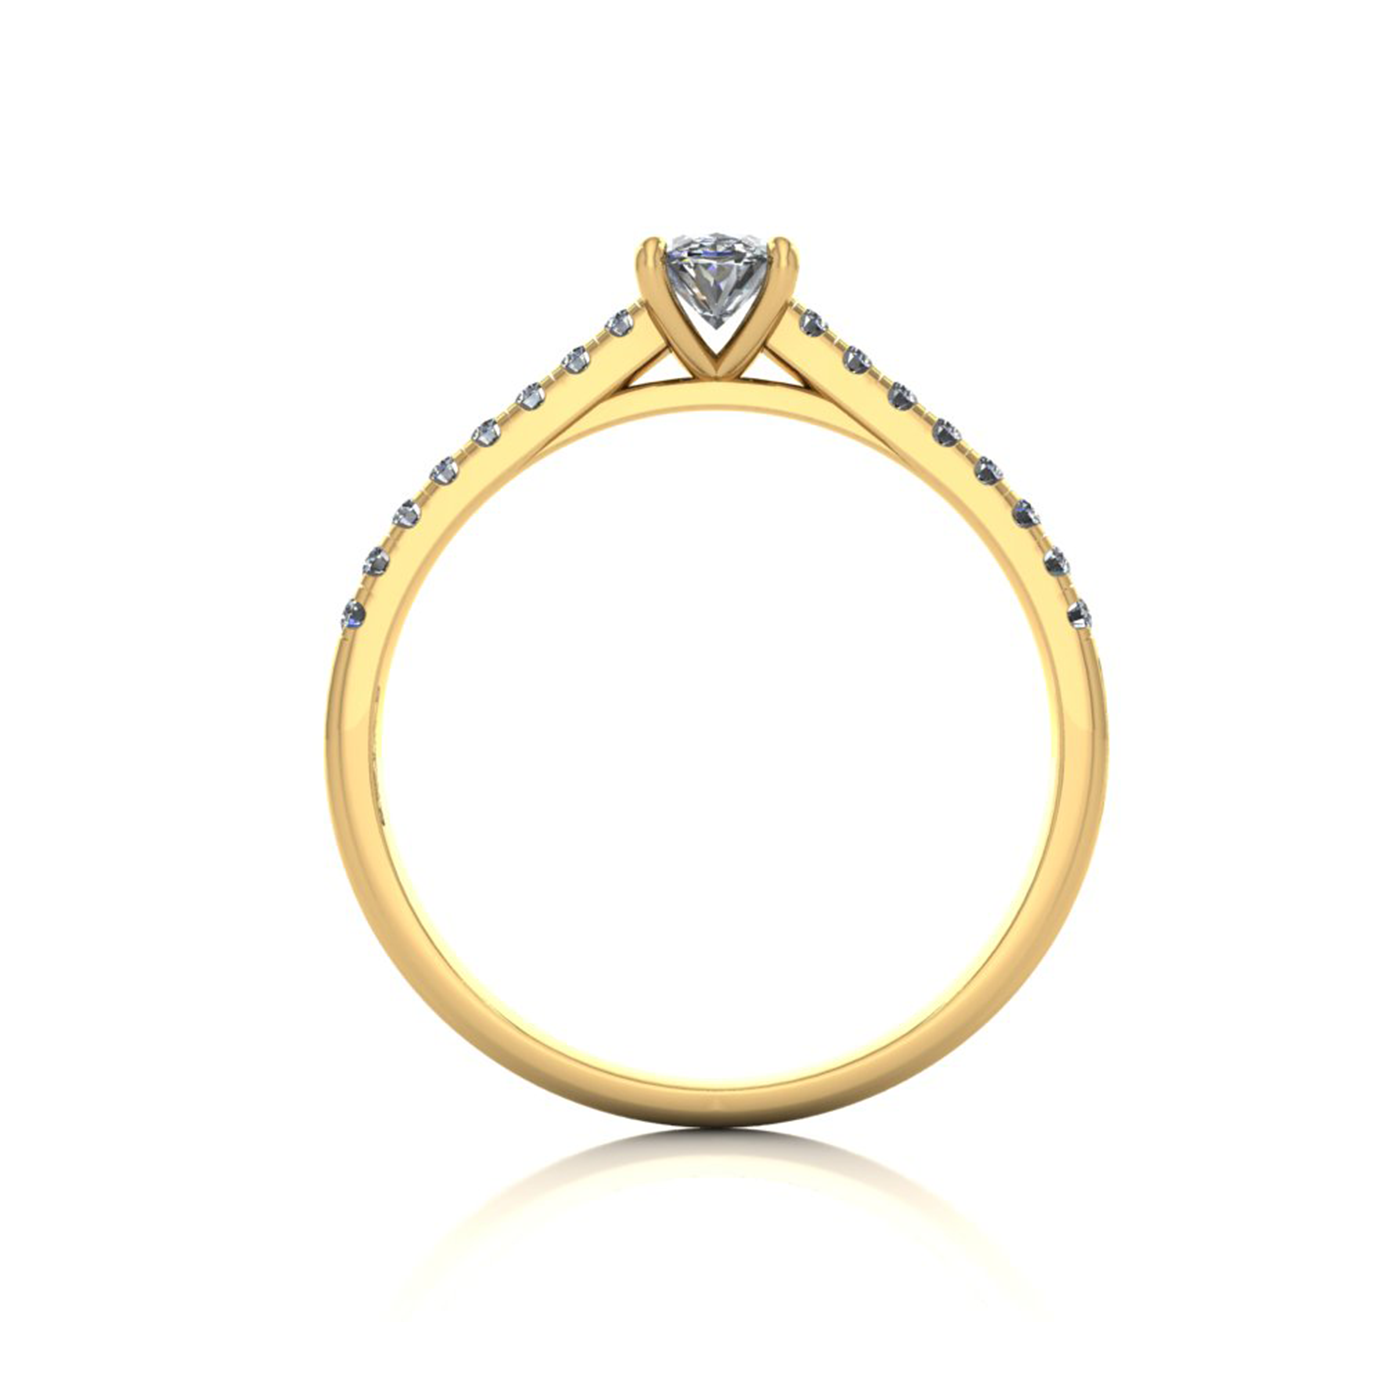 18k yellow gold  0,30 ct 4 prongs oval cut diamond engagement ring with whisper thin pavÉ set band